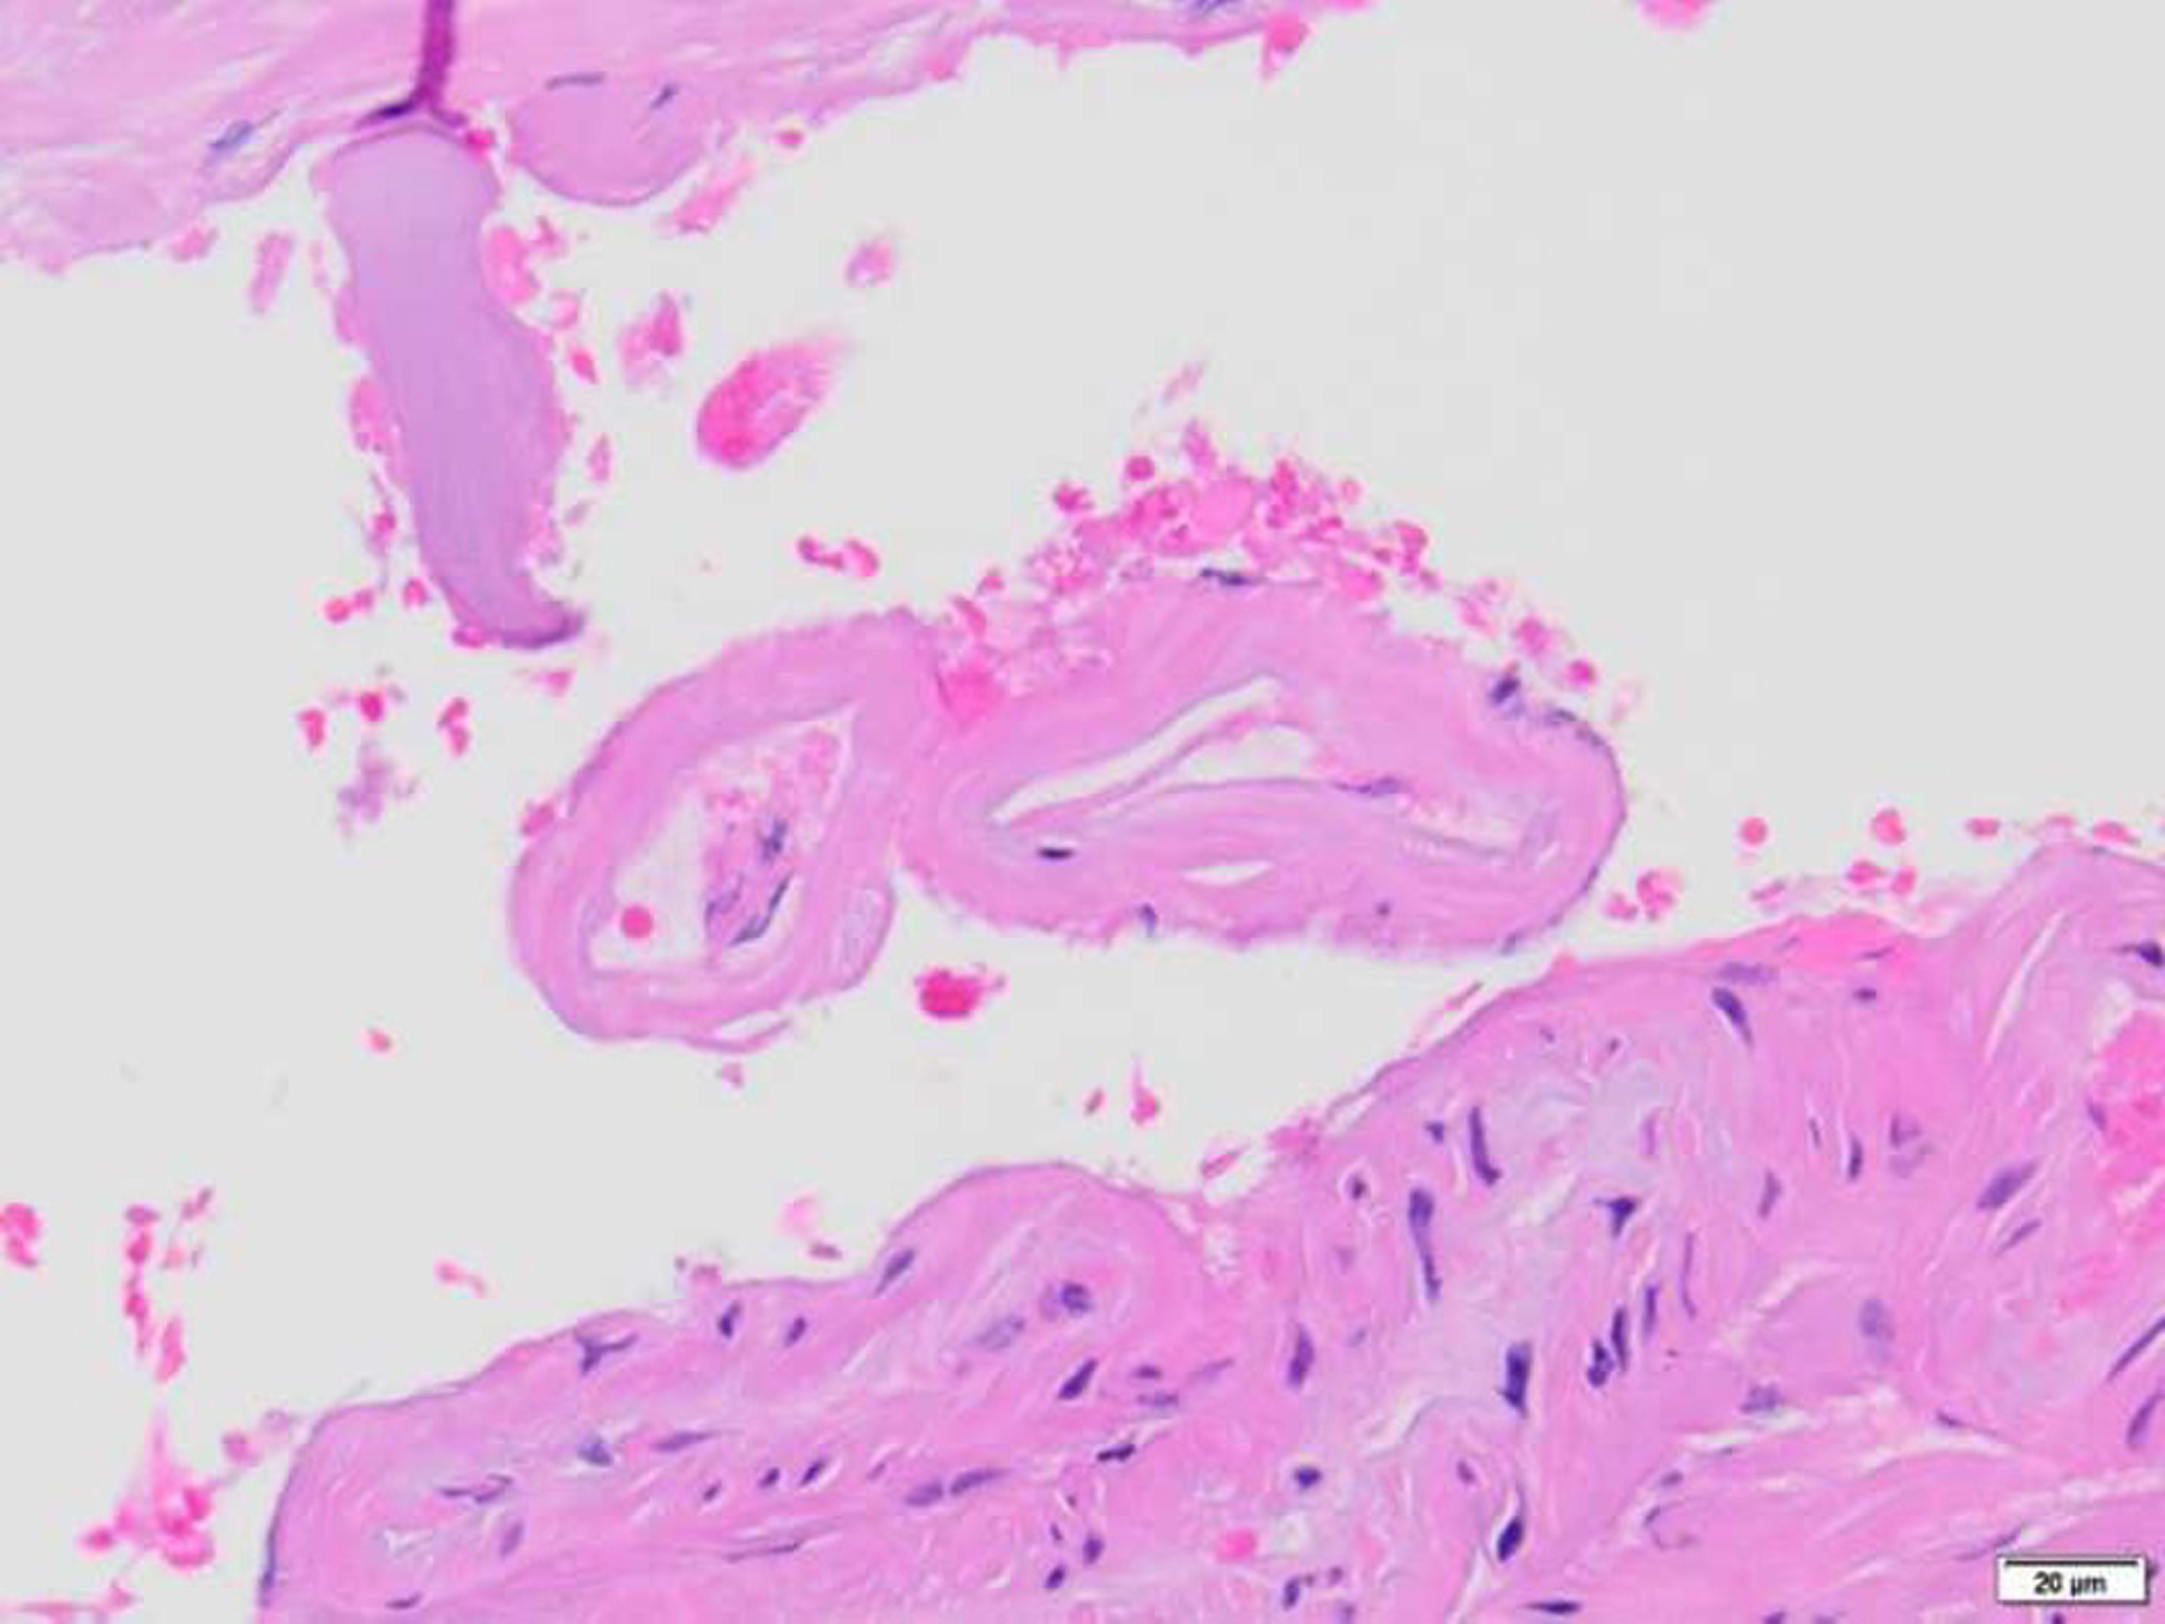 Leptomeningeal vascular biopsy in patient with suspected CAA showing complete replacement of vascular wall by homogenous eosinophilic amyloid categorized as CAA Grade 2. Confirmed by amyloid-ʲ immunohistochemistry (not shown). Hematoxylin and Eosin, 400x.